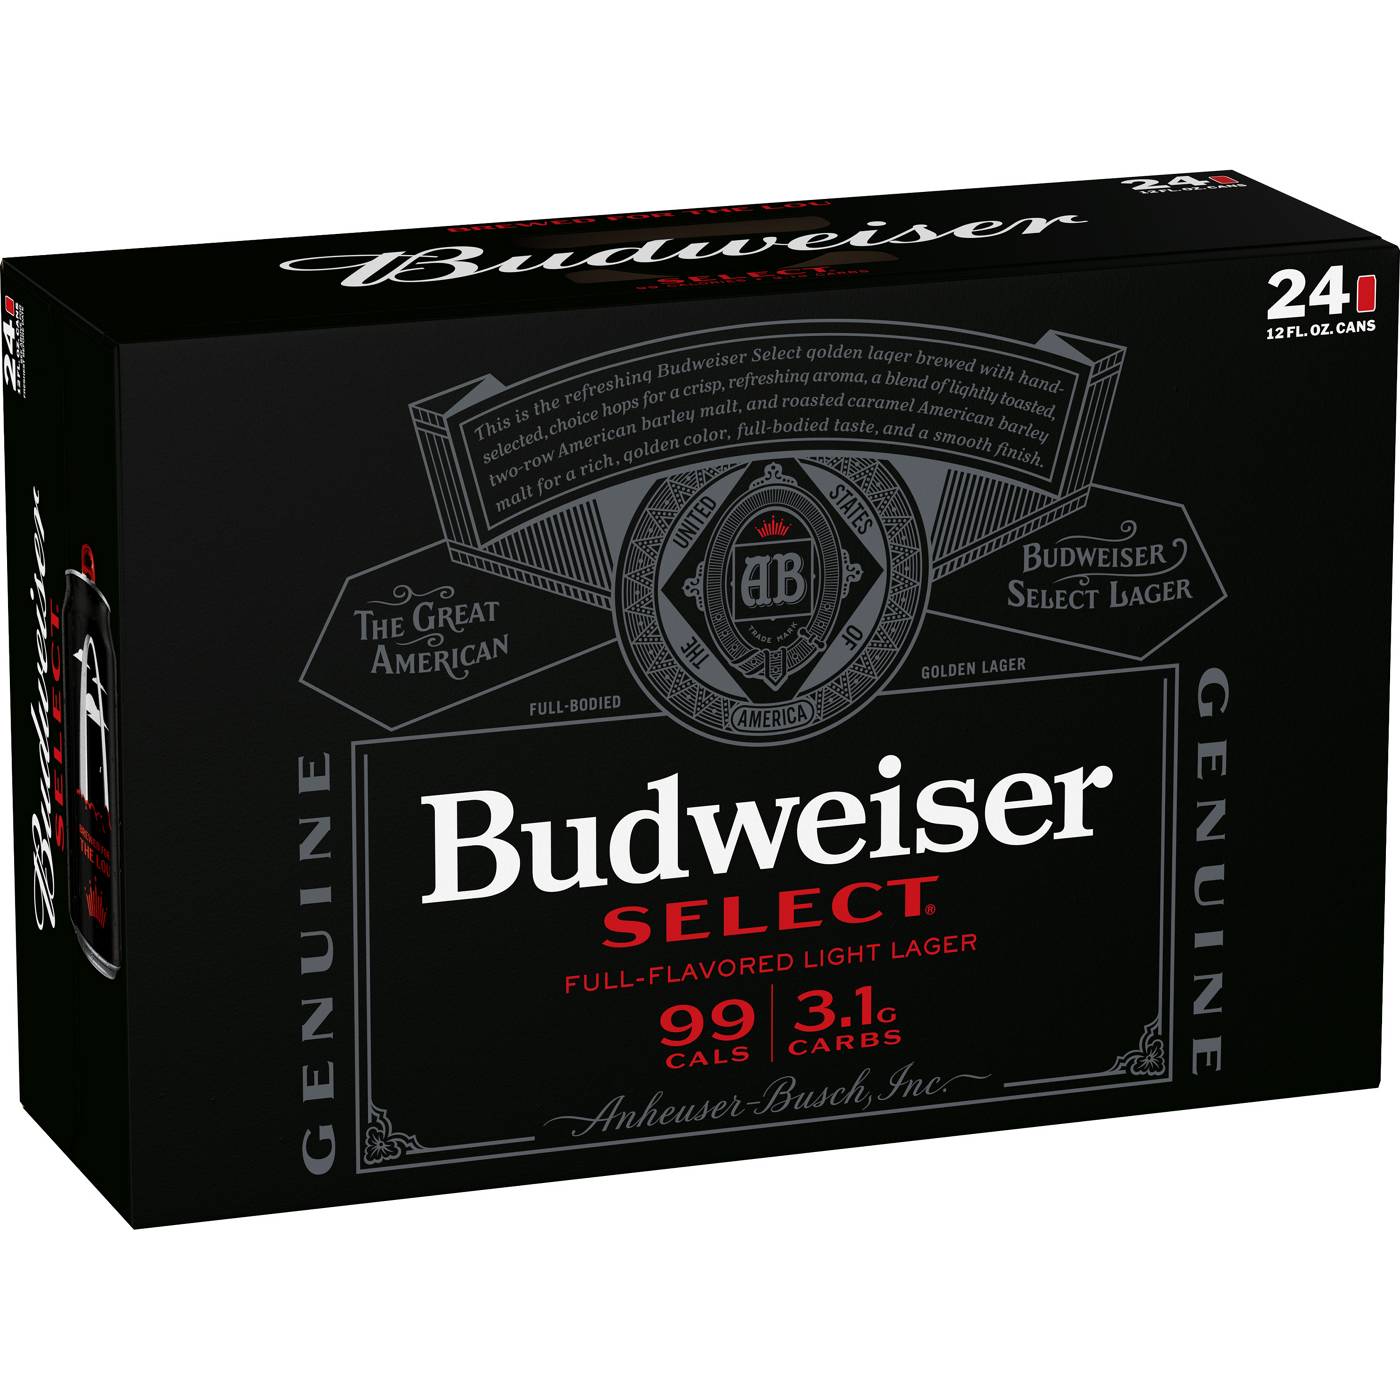 Budweiser Select Beer 12 oz Cans; image 1 of 2